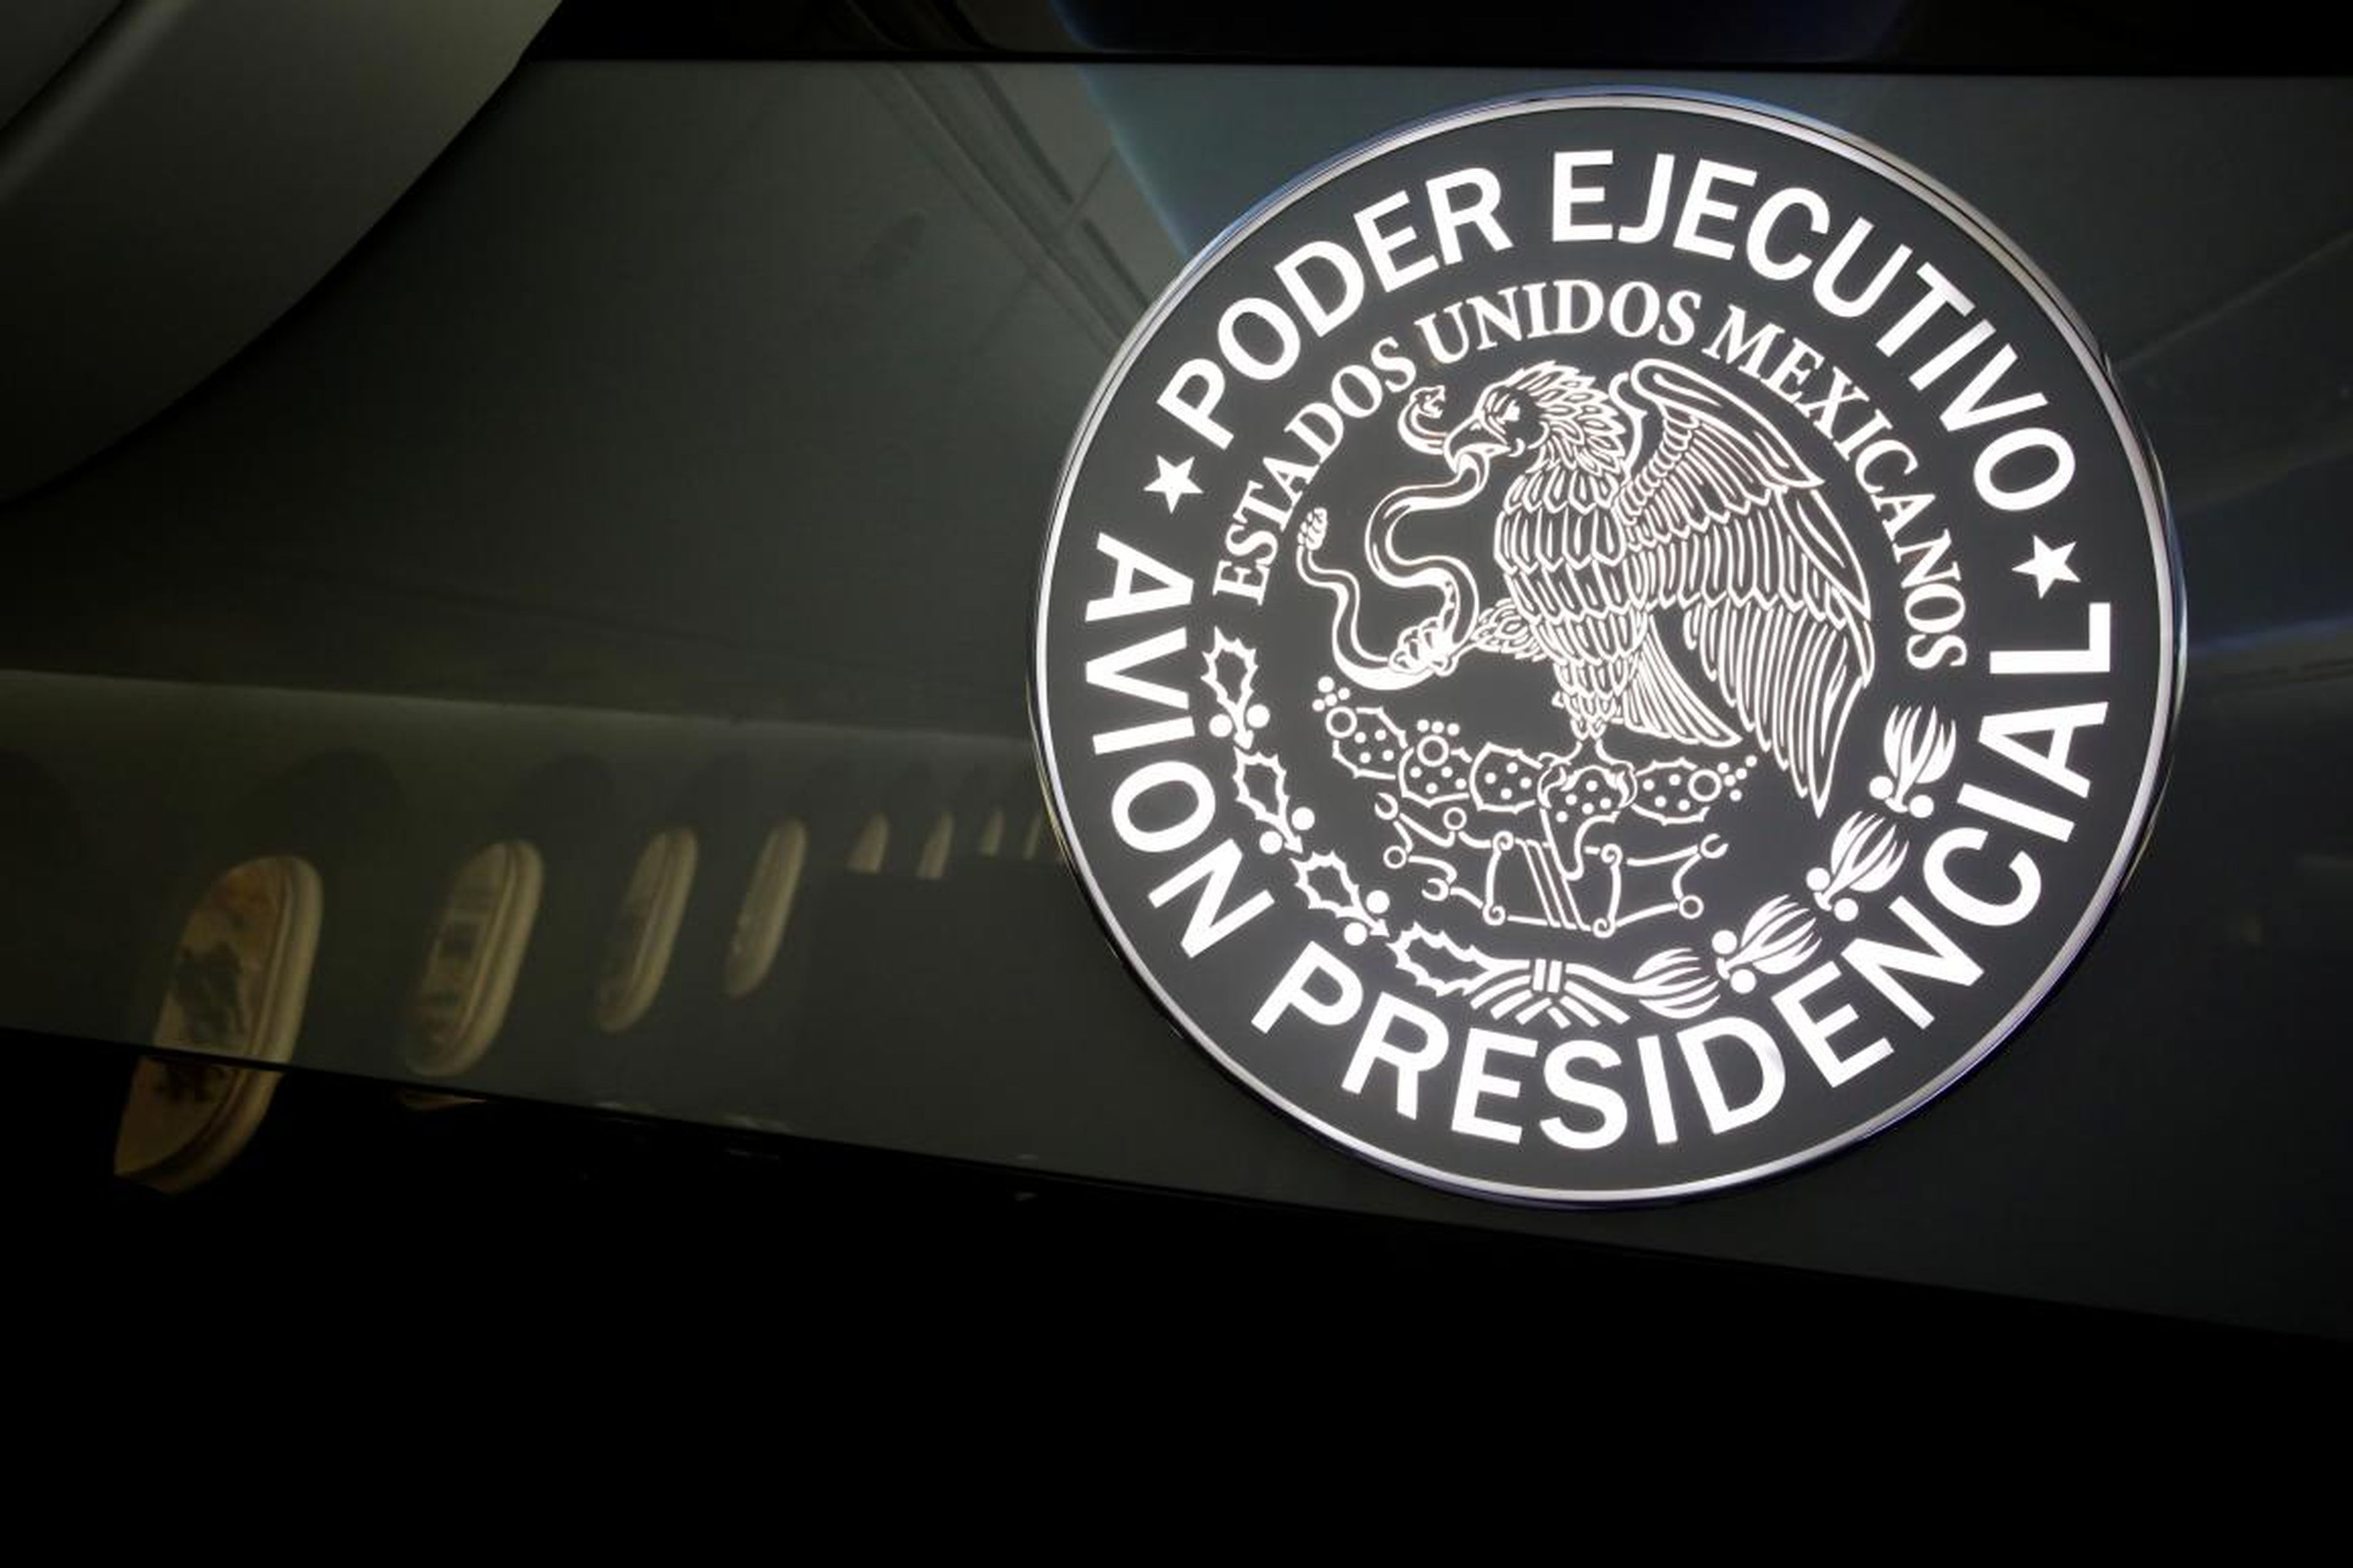 Naturally, the cabin of the jet is emblazoned with the presidential seal.